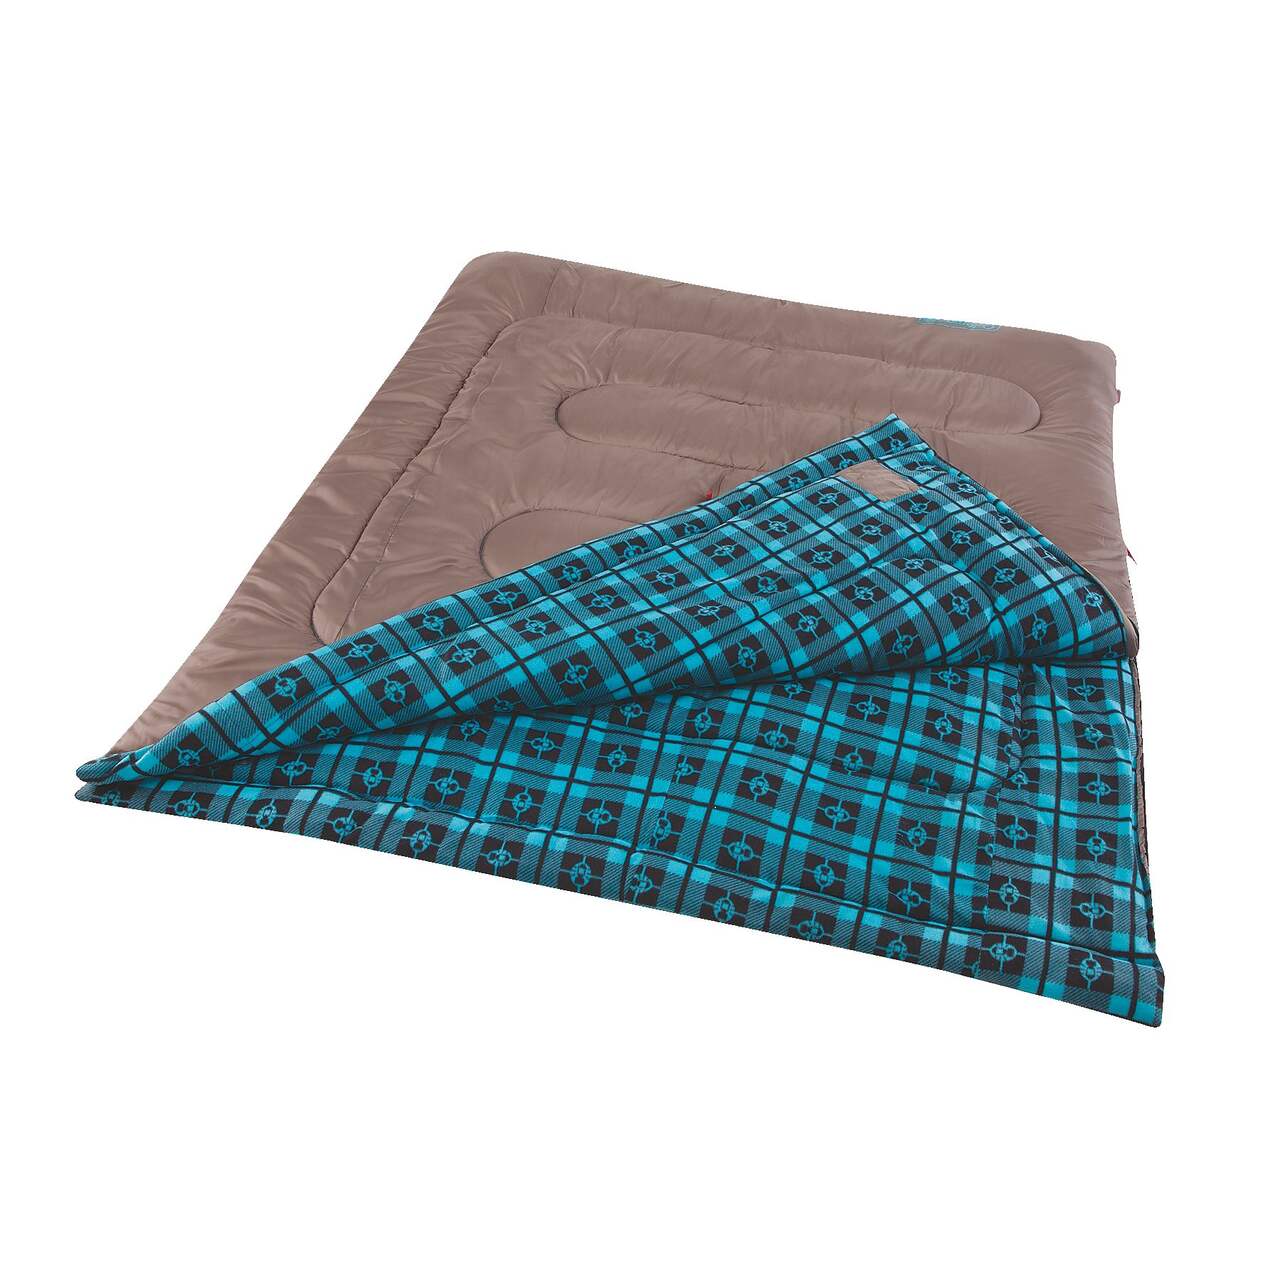 Coleman Granite Peak 7.2 °C Double Sleeping Bag w/ Compression Sack,  Insulated and Fleece Lined